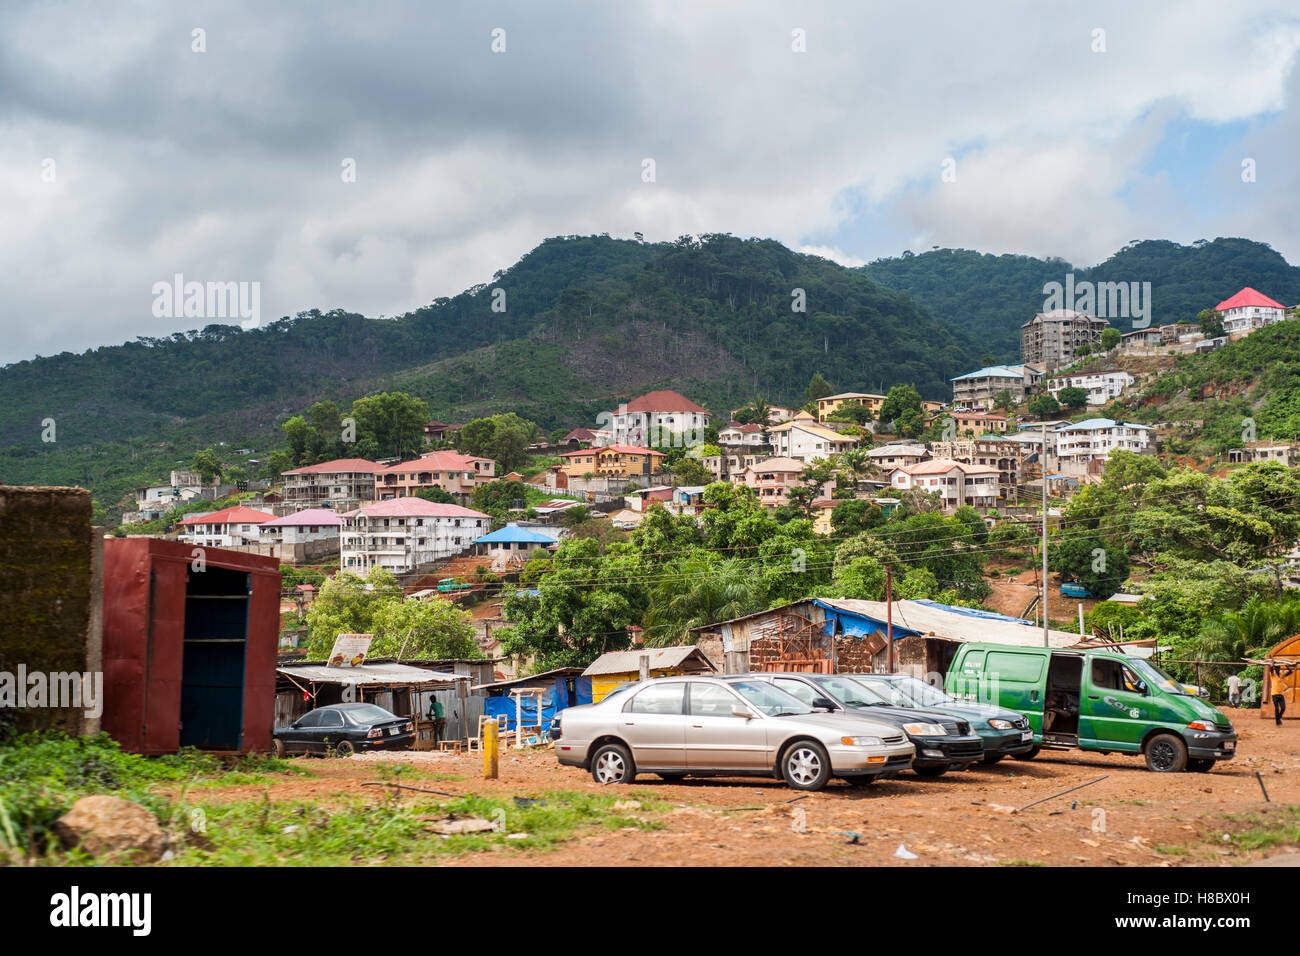 Houses on a hill in the Freetown Area, Sierra Leone Stock Photo